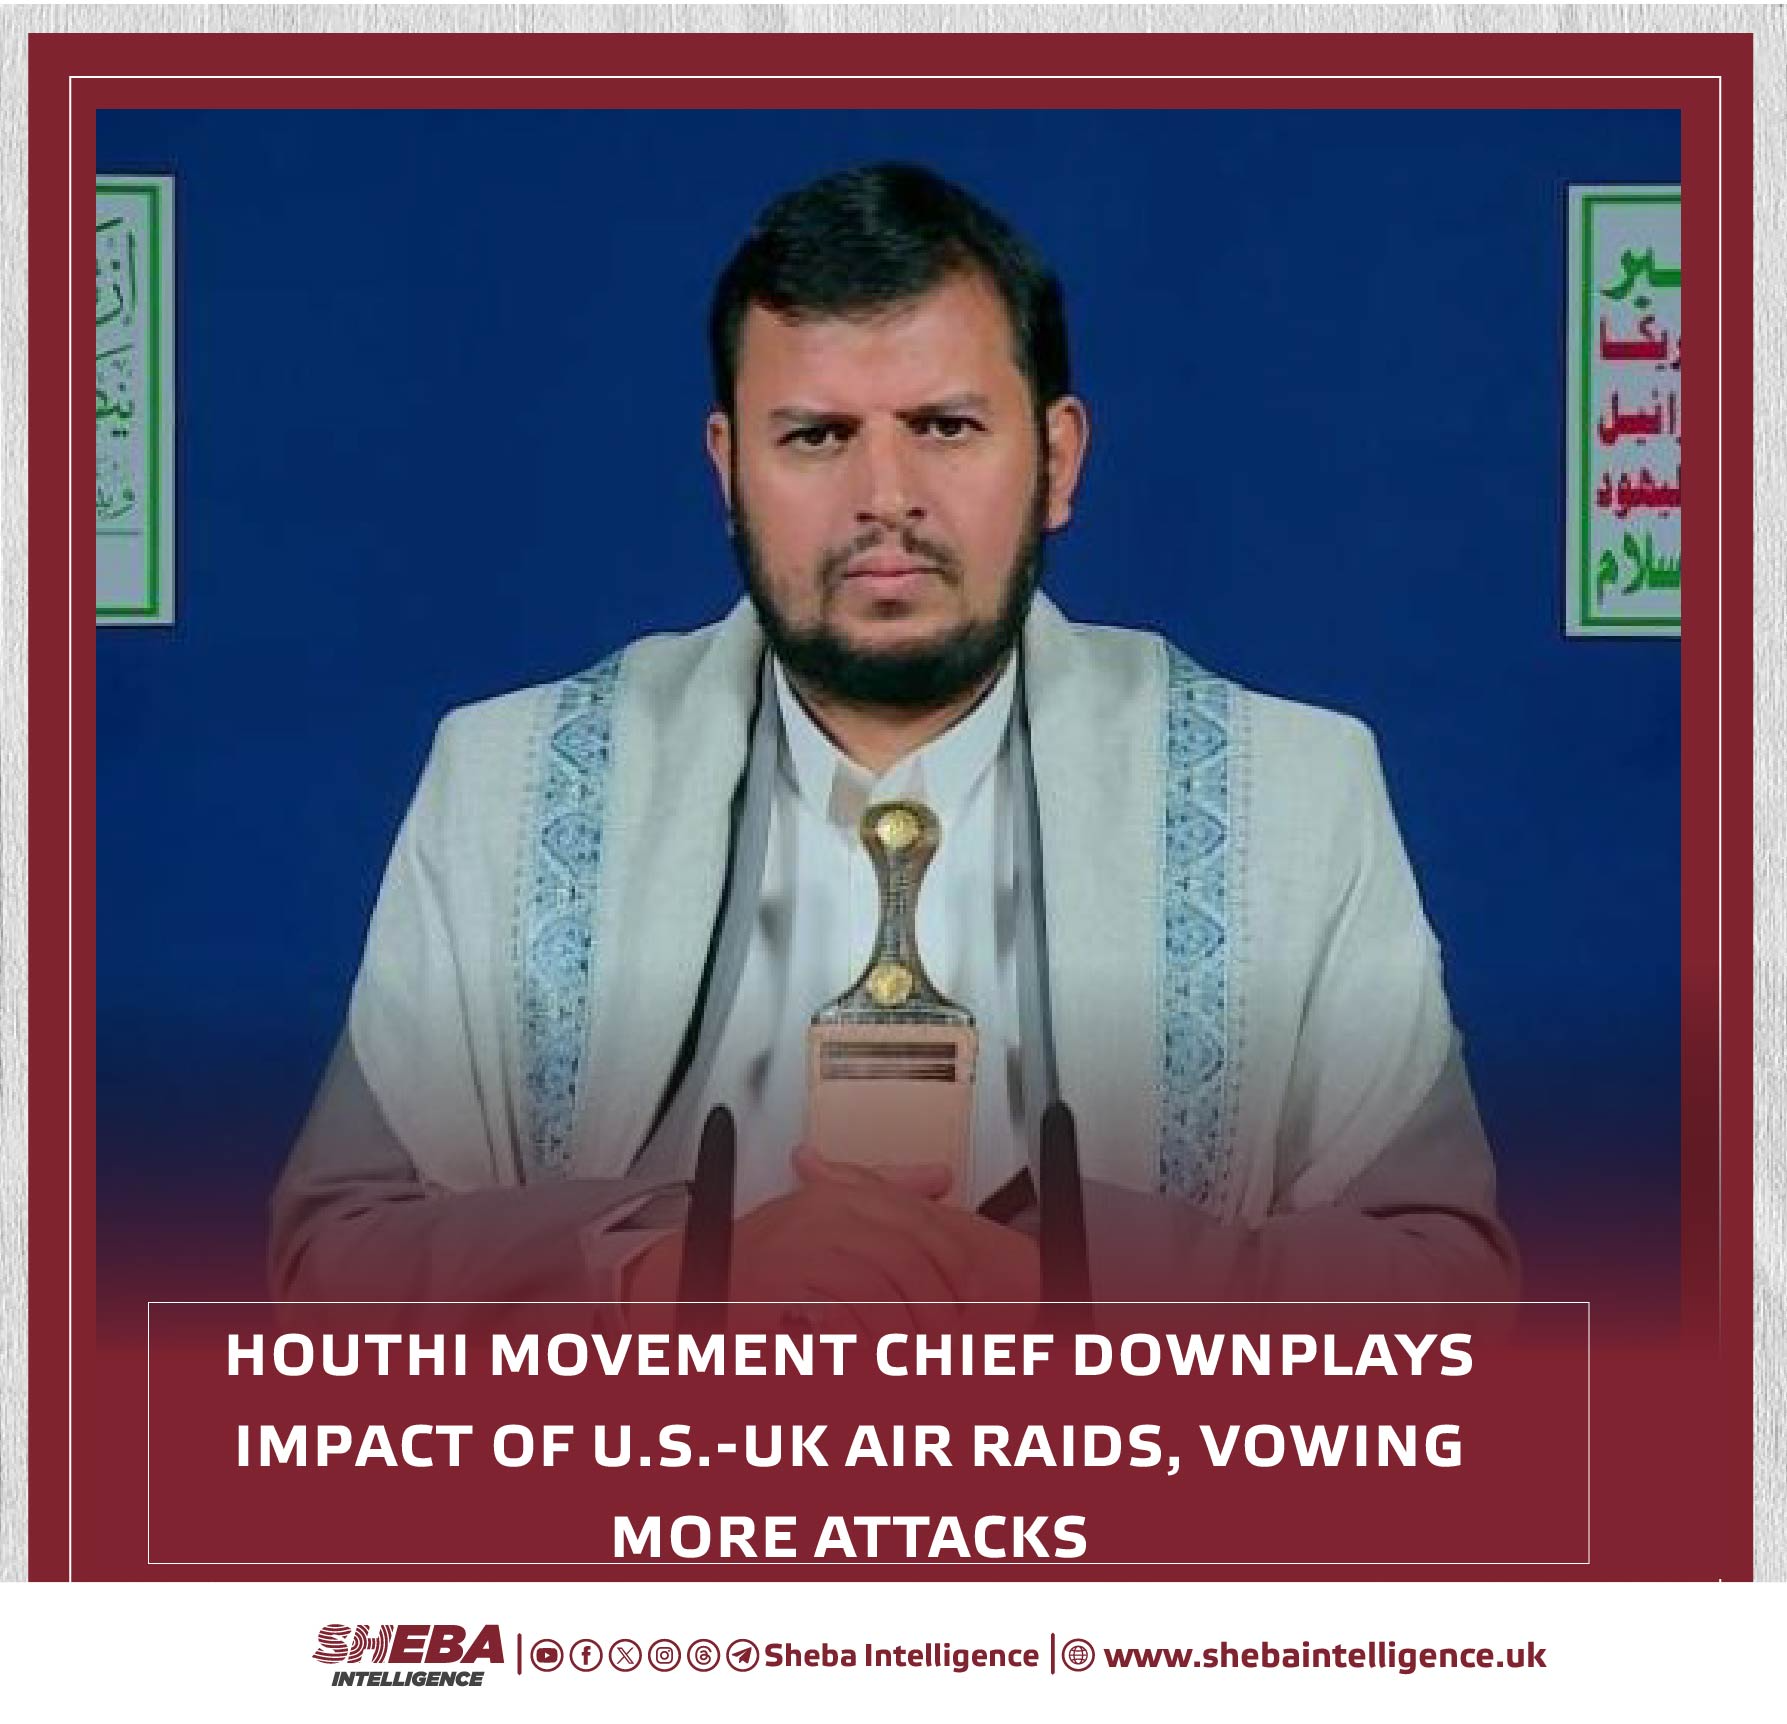 Houthi Movement Chief Downplays Impact of U.S.-UK Air Raids, Vowing More Attacks